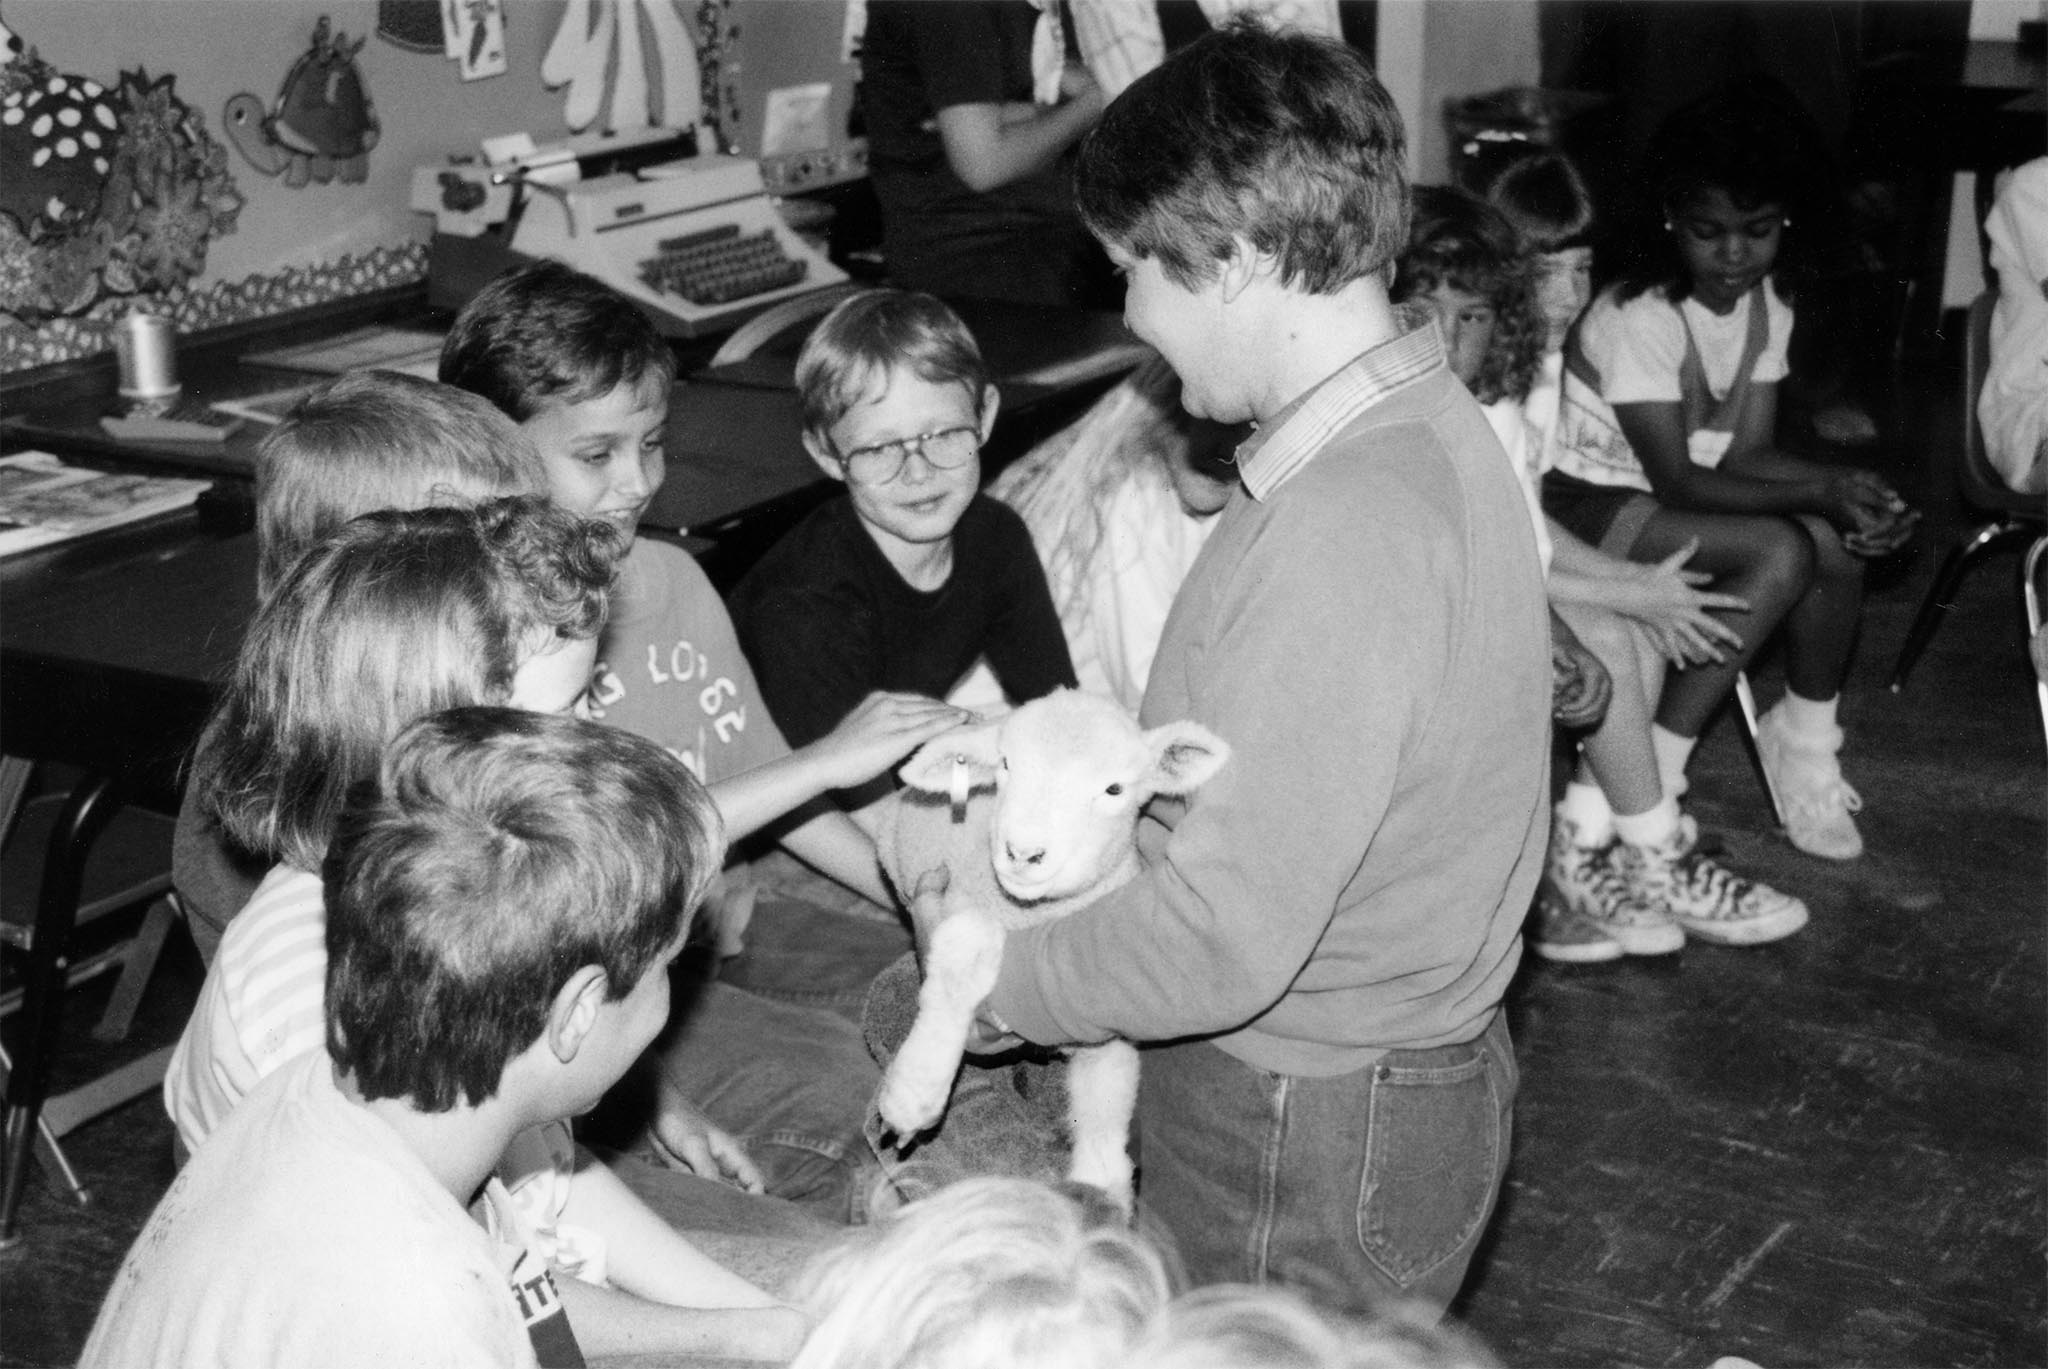 Taken in 1990, this photo shows the heart of the Ag in the Classroom program: introducing agriculture to students who have little or no connection to farming and ranching. Logan County Farm Bureau’s Linda Fruendt made the Ag in the Classroom program come alive for these Guthrie elementary students with a Dorset lamb. Fruendt told the students how farmers care for their livestock and presented a brief summary on raising animals. The highlight of the program for the students seemed to be when each had the opportunity to hold and pet the lamb. The Oklahoma Farm Bureau Women’s Leadership Committee continues to proudly support the Ag in the Classroom program on many levels, helping Oklahoma educators learn more about agriculture and how to incorporate farming and food into their daily classroom activities.